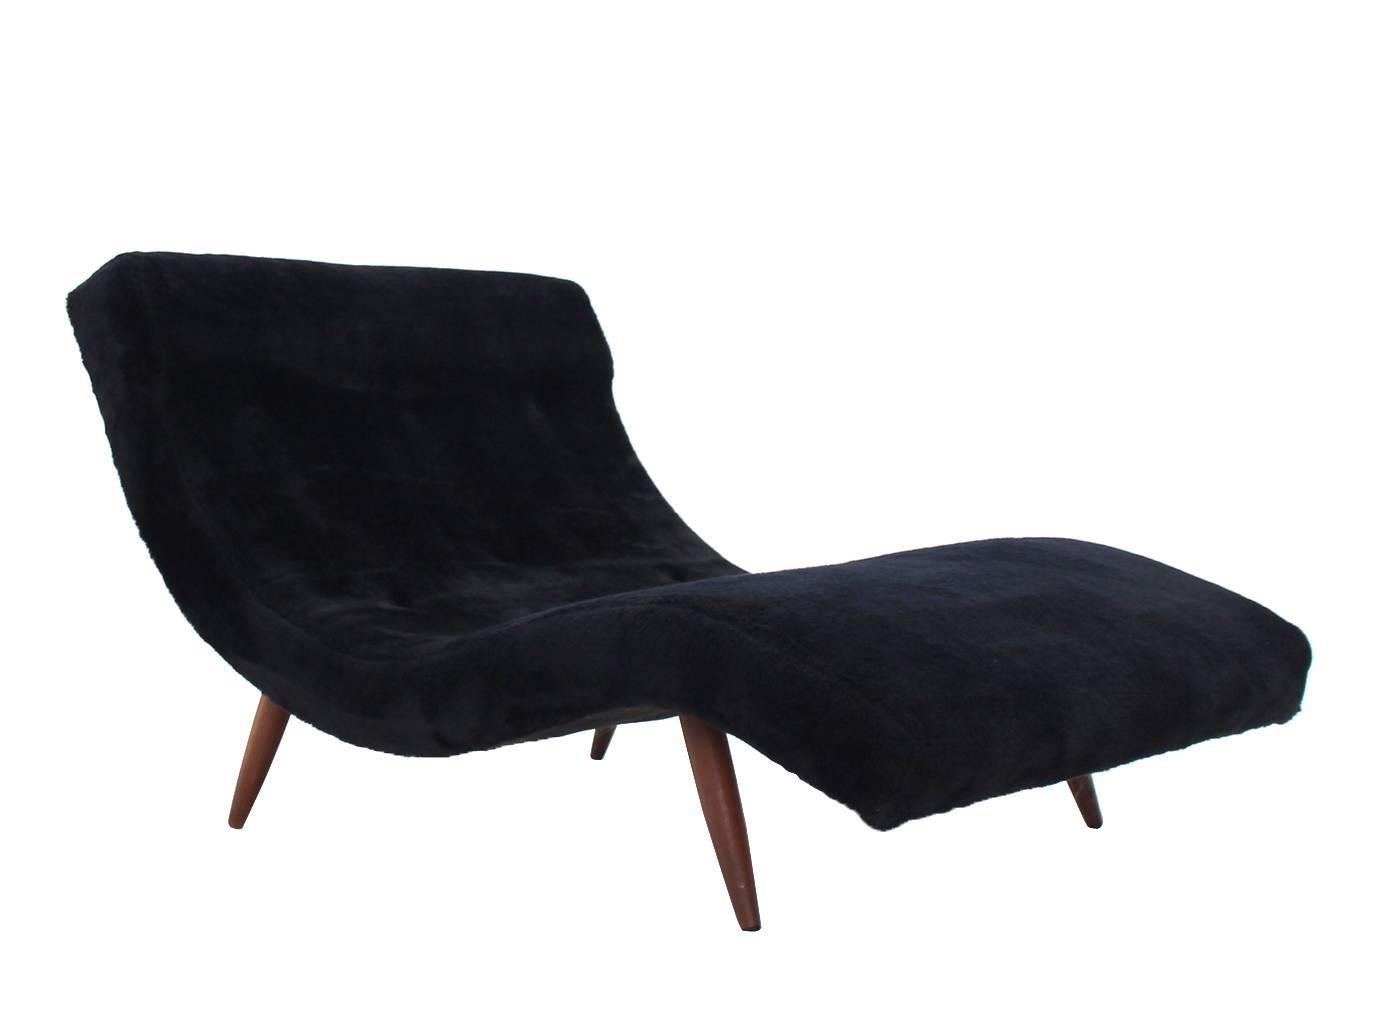 20th Century Adrian Pearsall Chaise Lounge